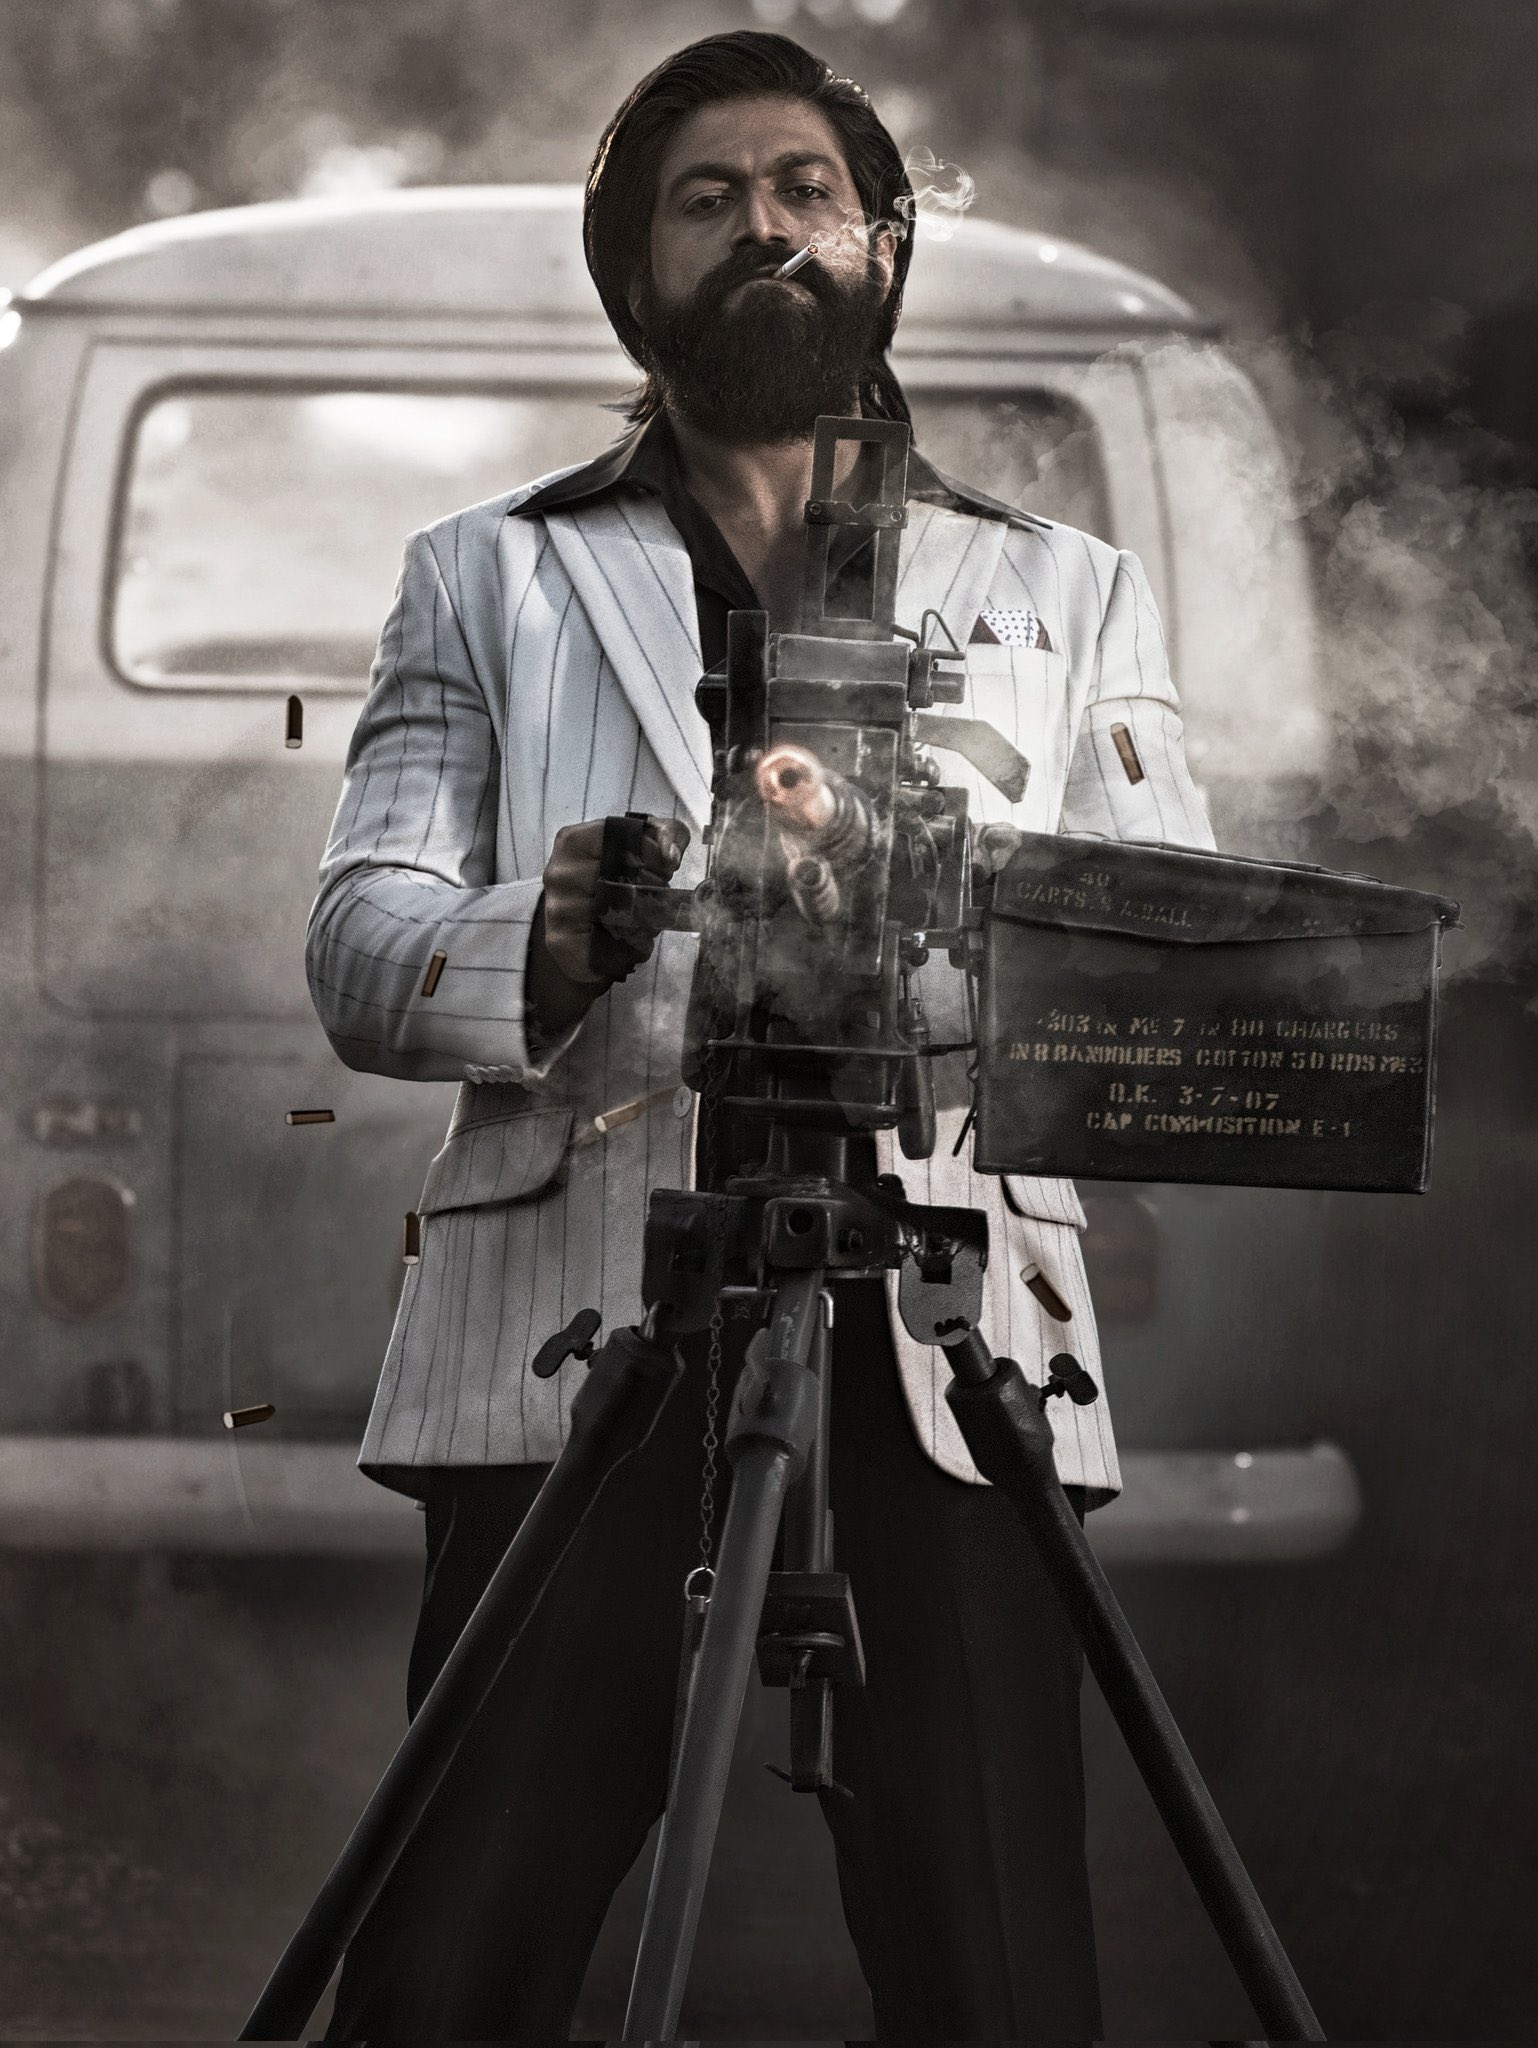 KGF2 Movie HD Stills , Images, Pictures | 123HDgallery